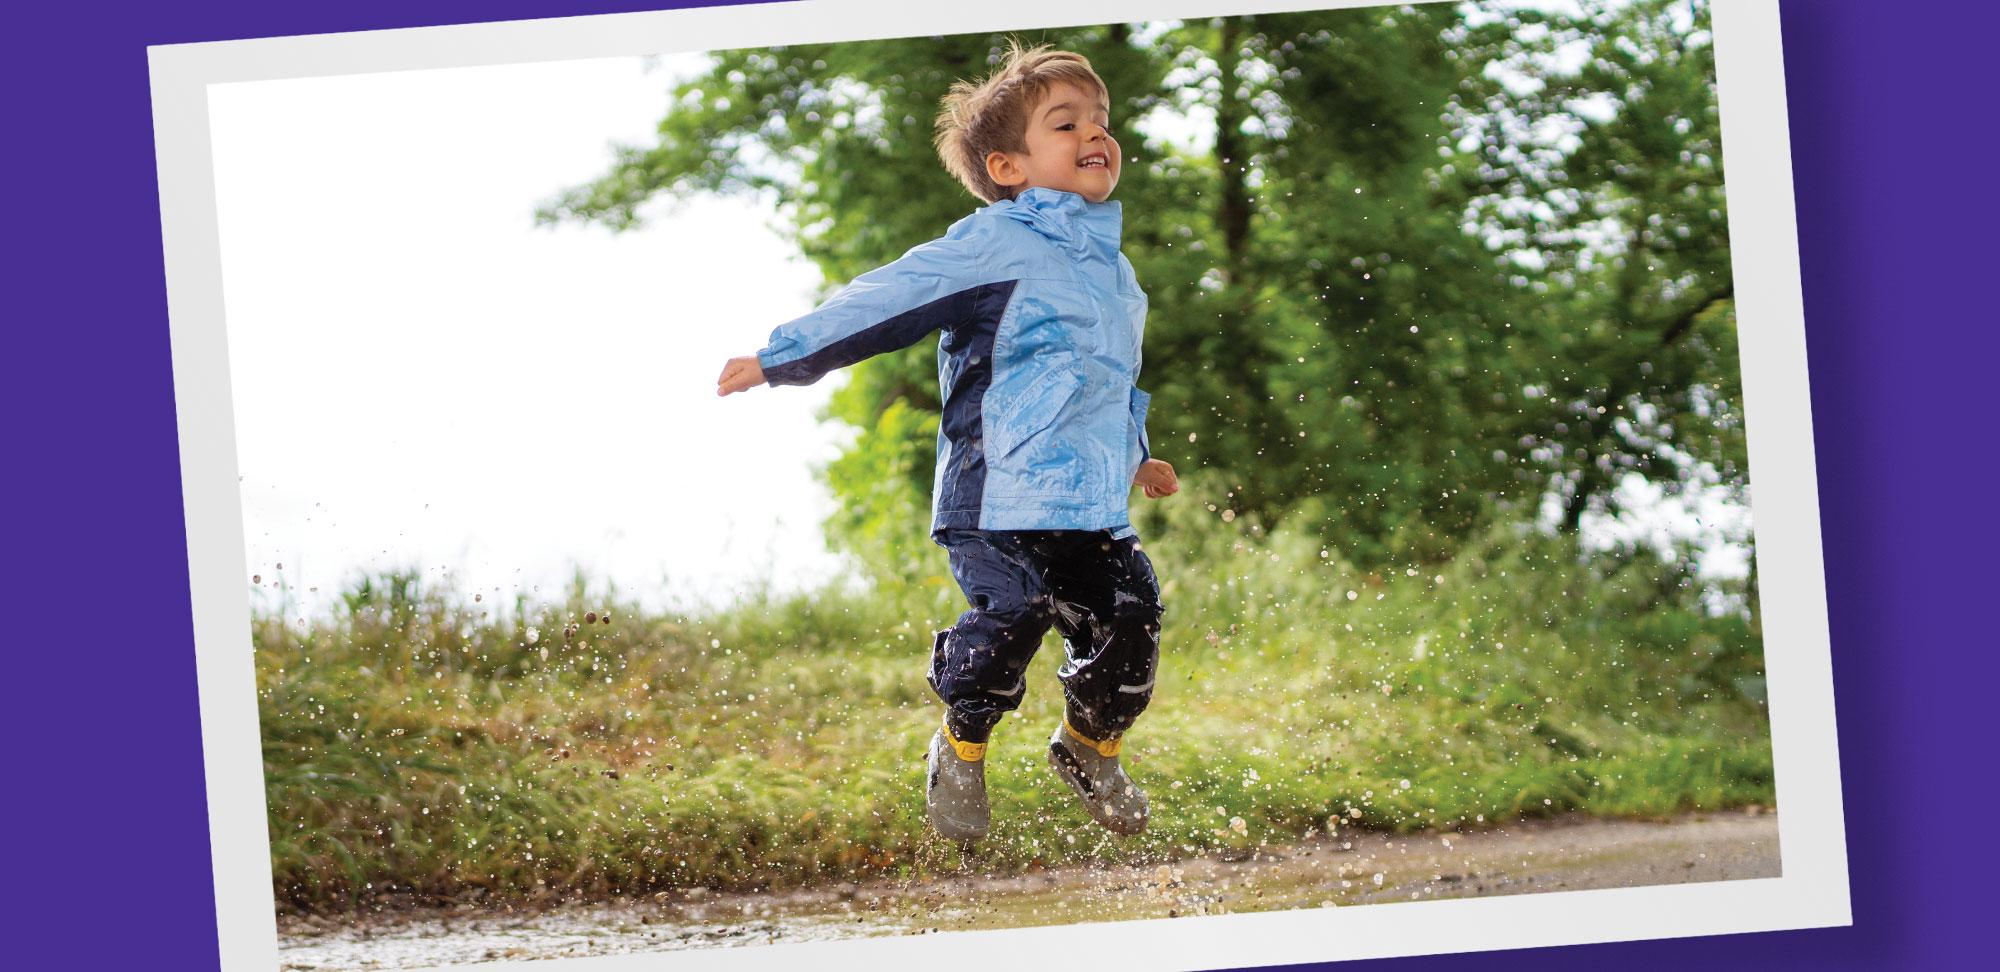 Photo of a boy jumping in a rain puddle